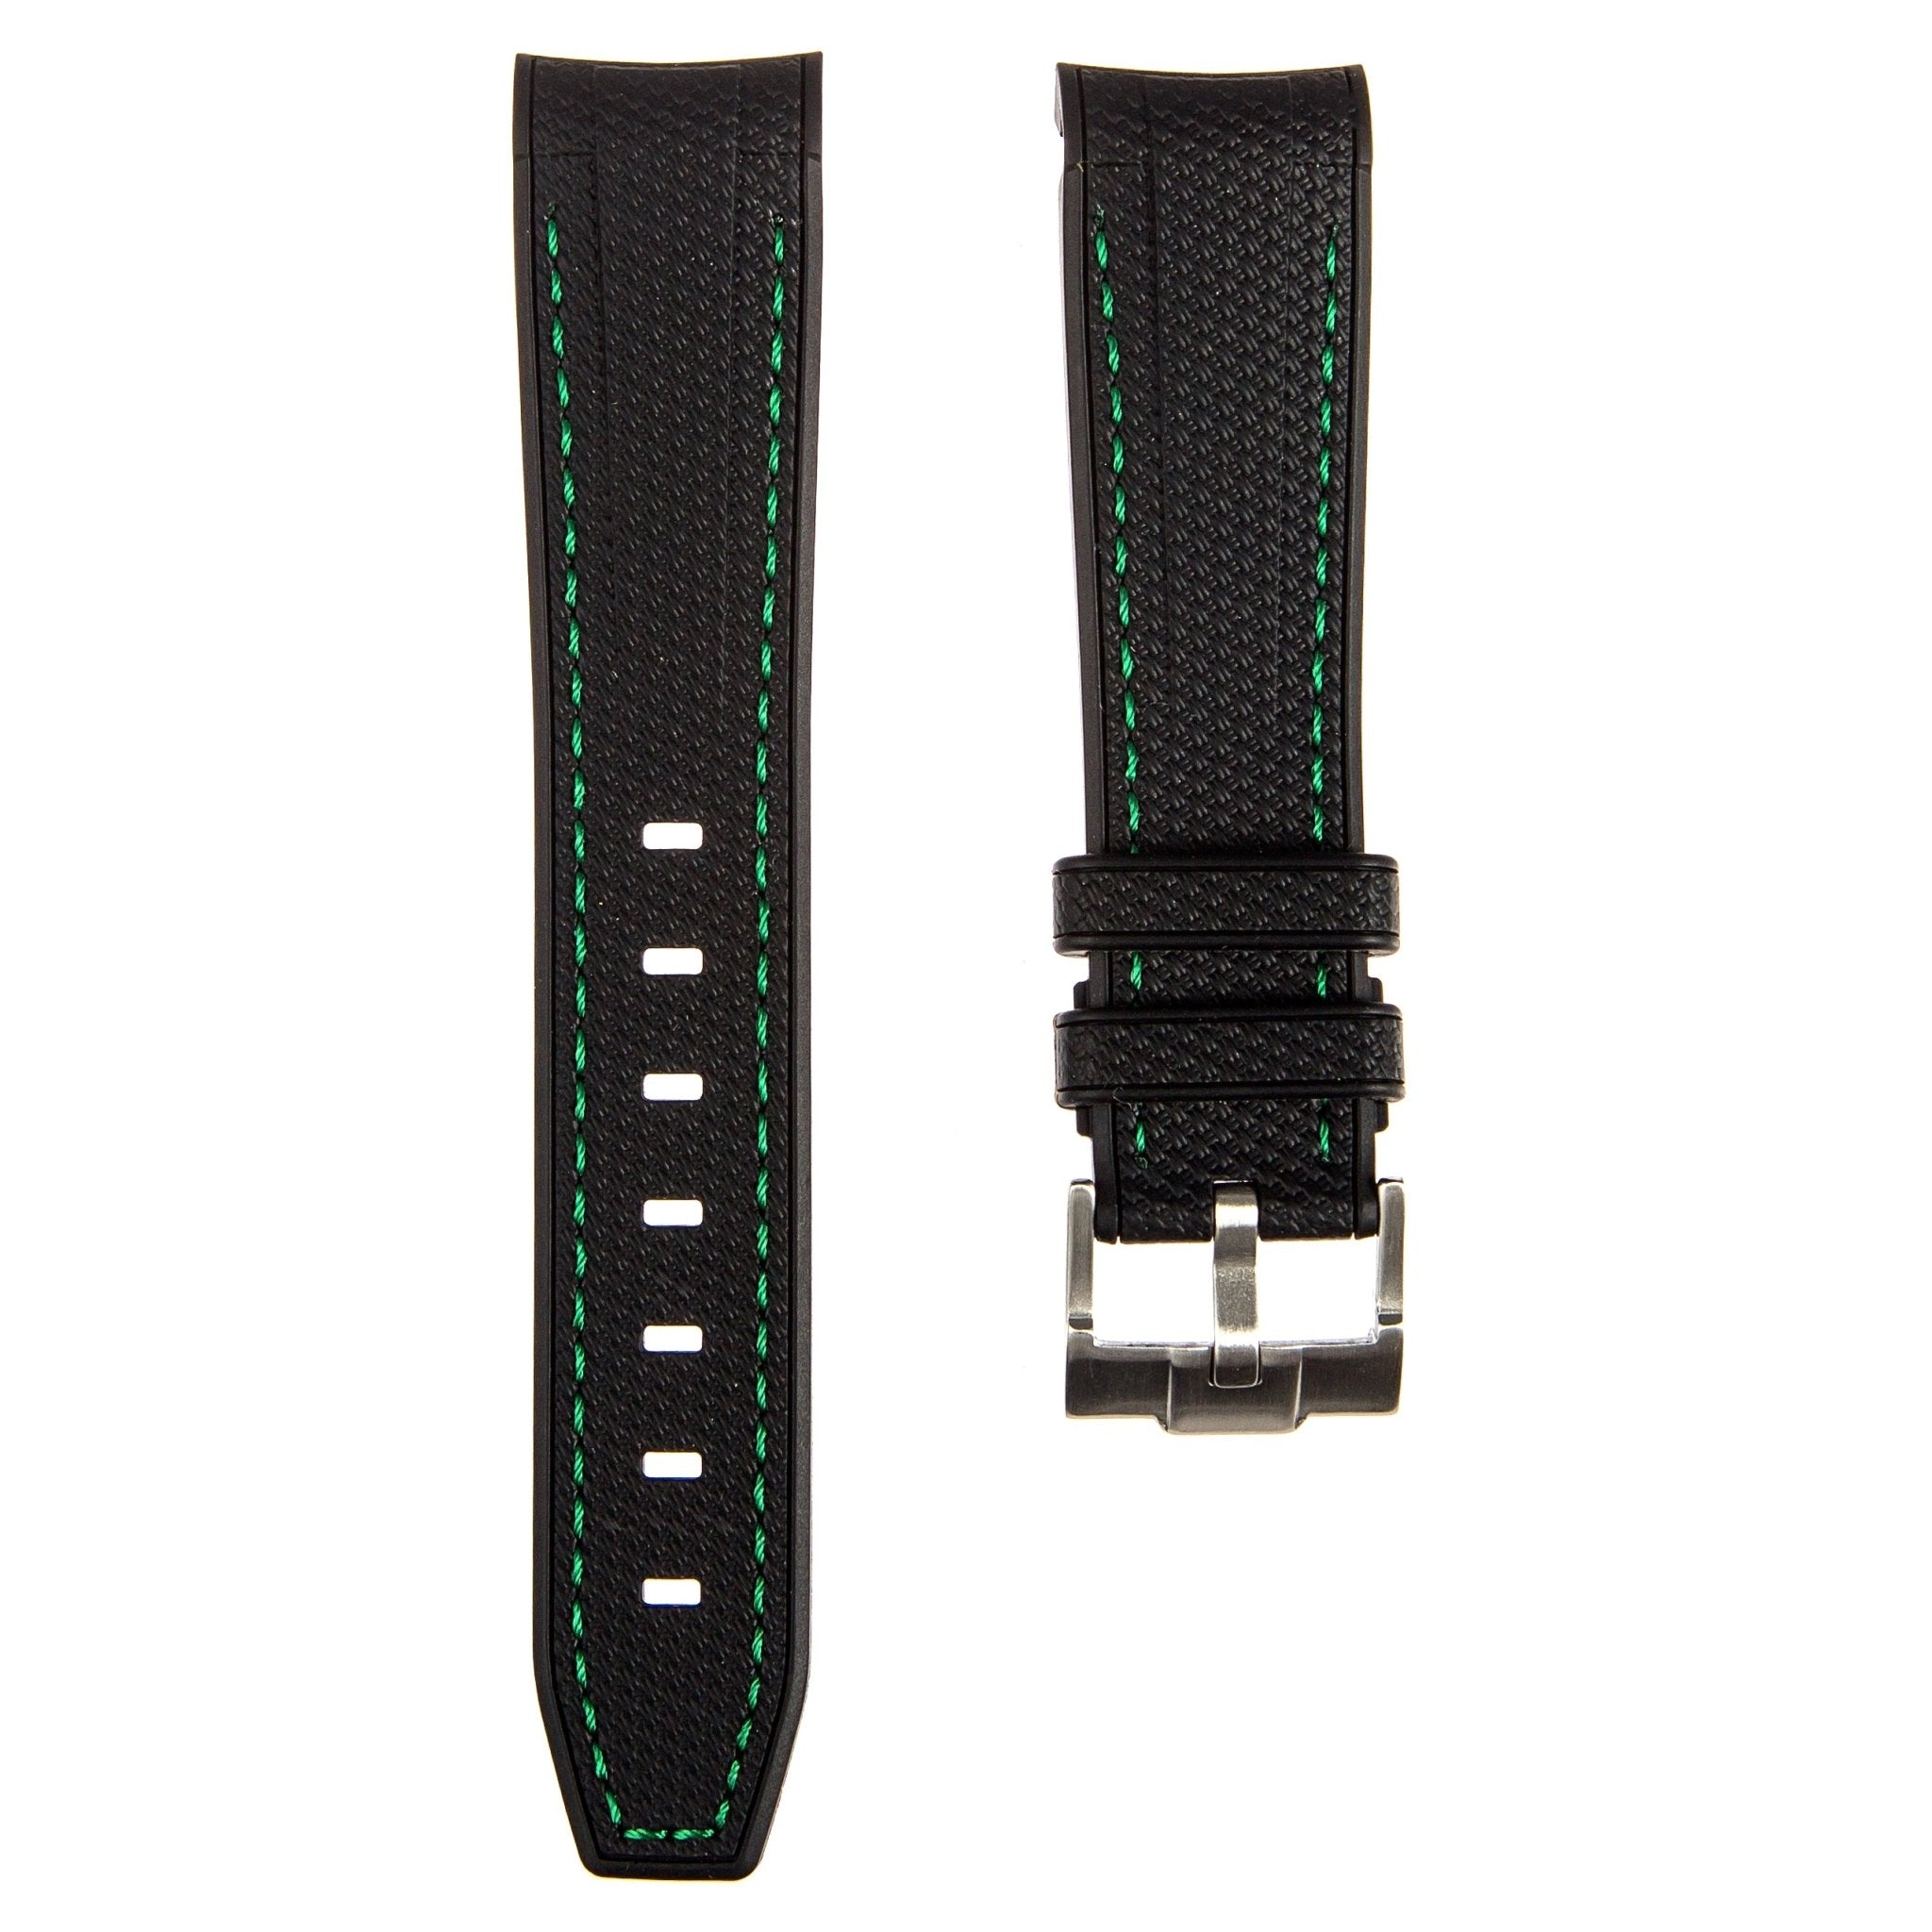 Textured Curved End Premium Silicone Strap - Black with Green Stitch (2405) -StrapSeeker